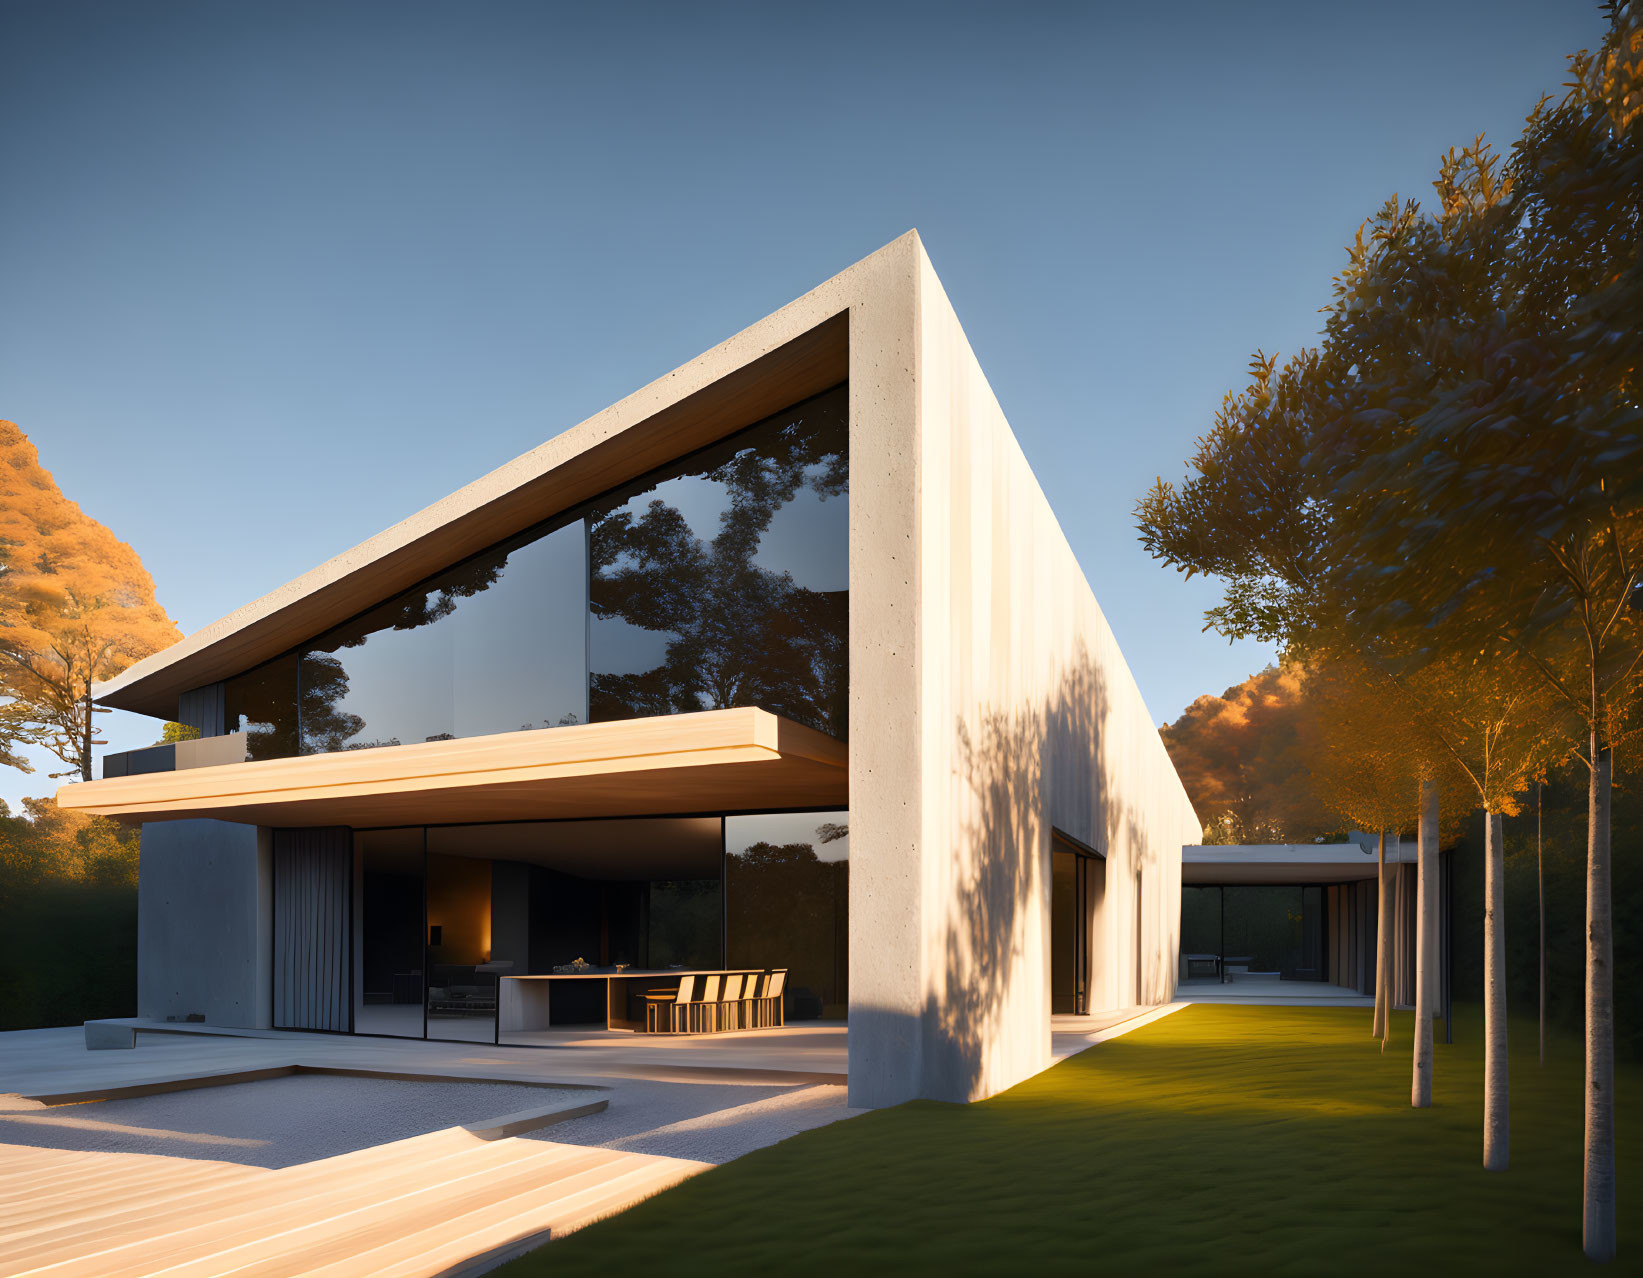 Contemporary House with Large Windows and Cantilevered Design in Tree-Filled Setting